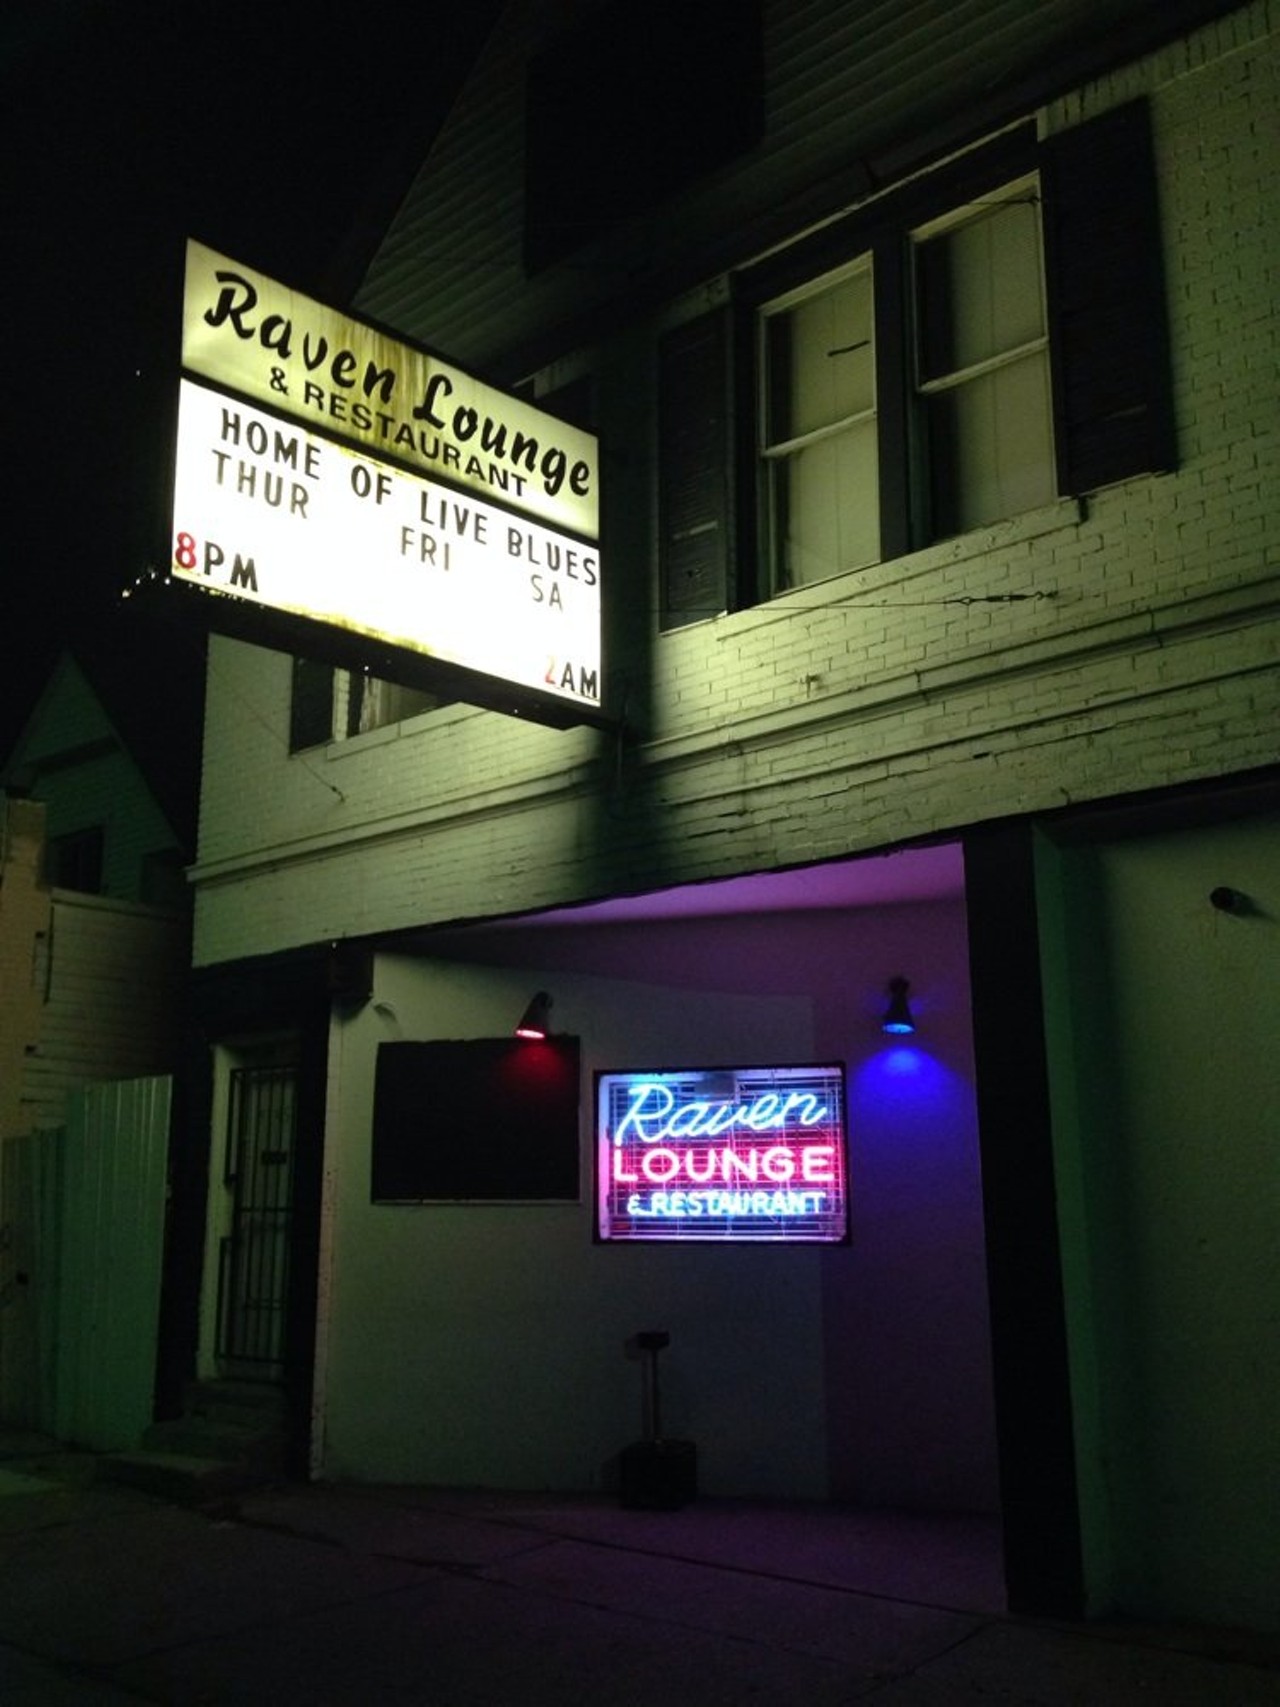 Raven's Lounge and Restaurant, 5145 Chene St. Owned by Tommy Stephens, this spot's claim to fame is that it's the oldest blues club in all of Michigan. It's tucked away on a lesser-traveled Chene Street. The live music, along with great drinks and soul food make this place a hidden gem. (Photo by Yelp user Eddie C.)